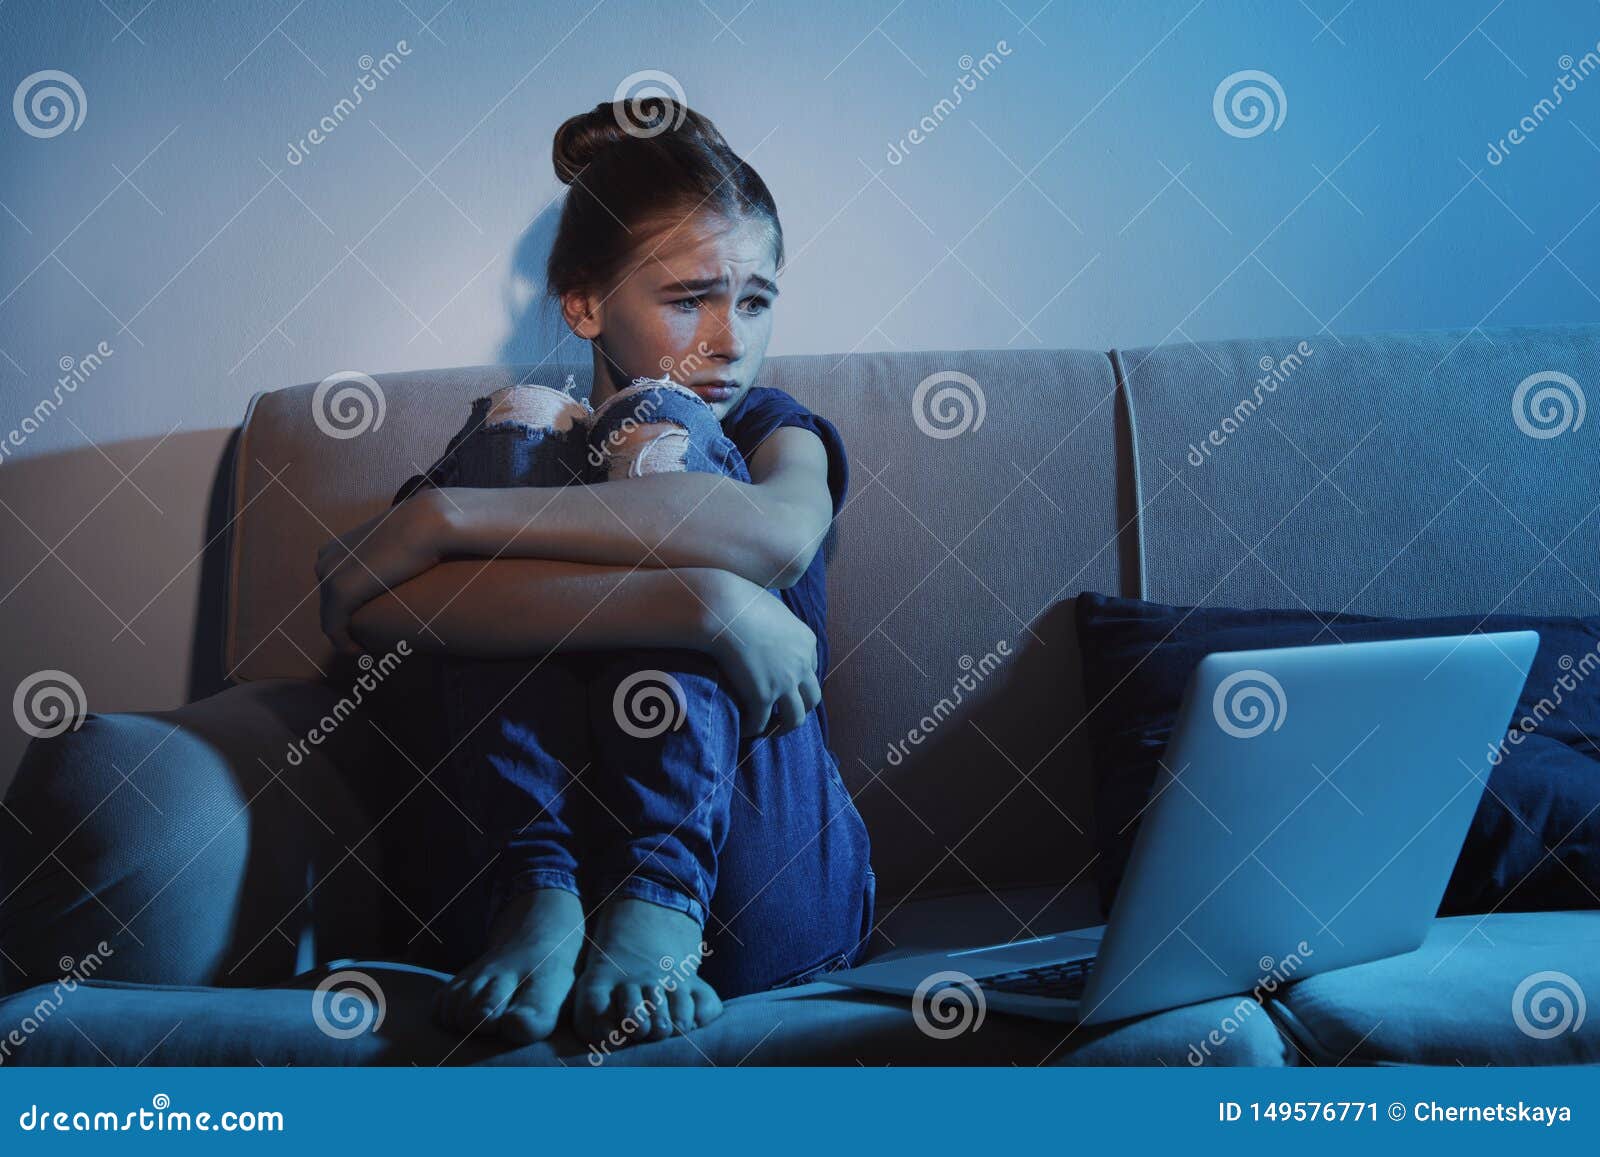 frightened teenage girl with laptop on sofa. danger of internet